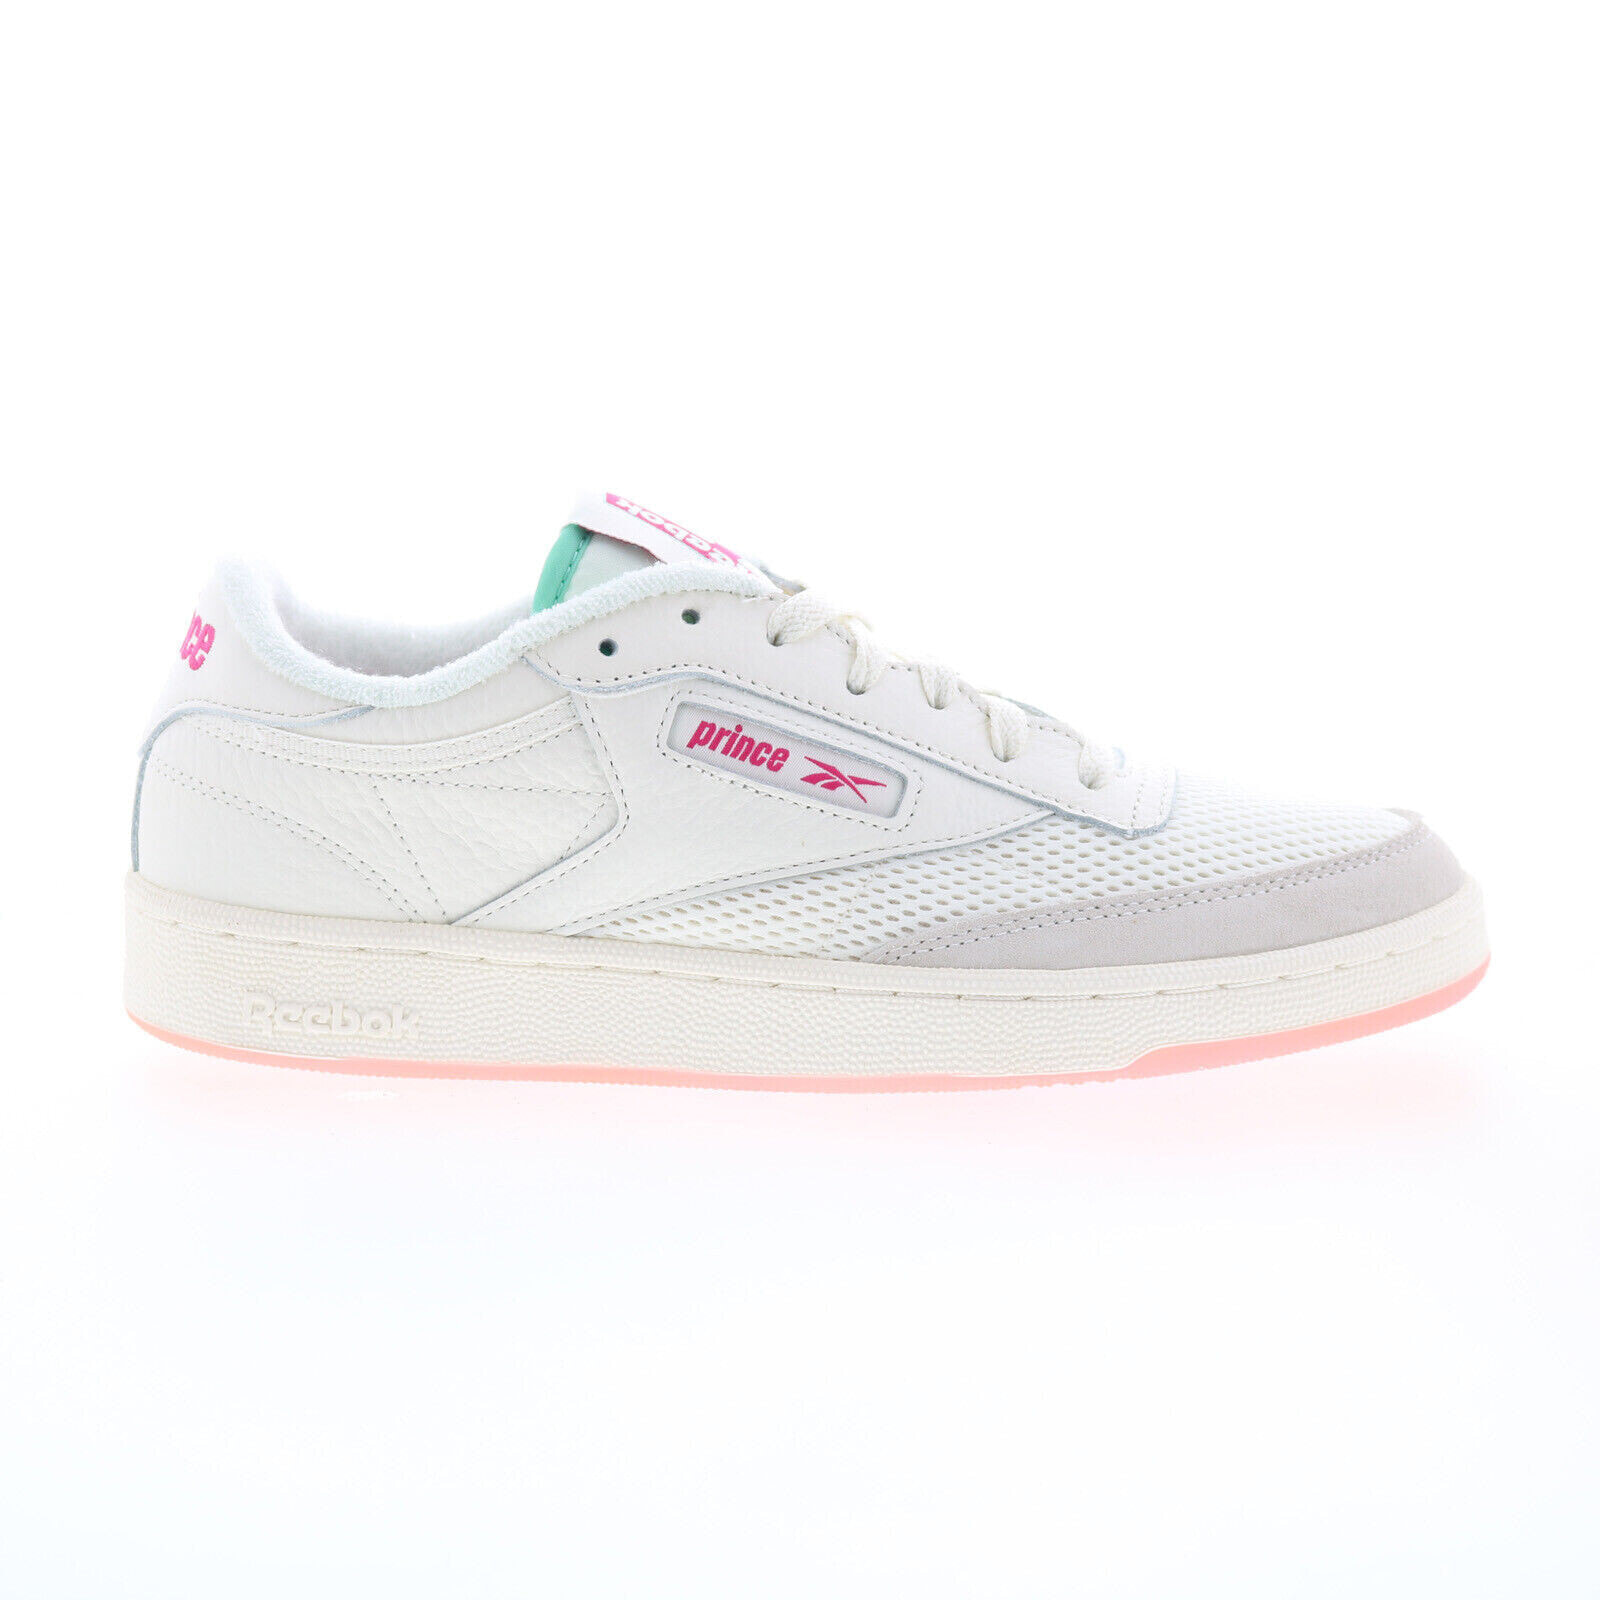 Reebok Club C 85 Prince Mens White Leather Lace Up Lifestyle Sneakers Shoes